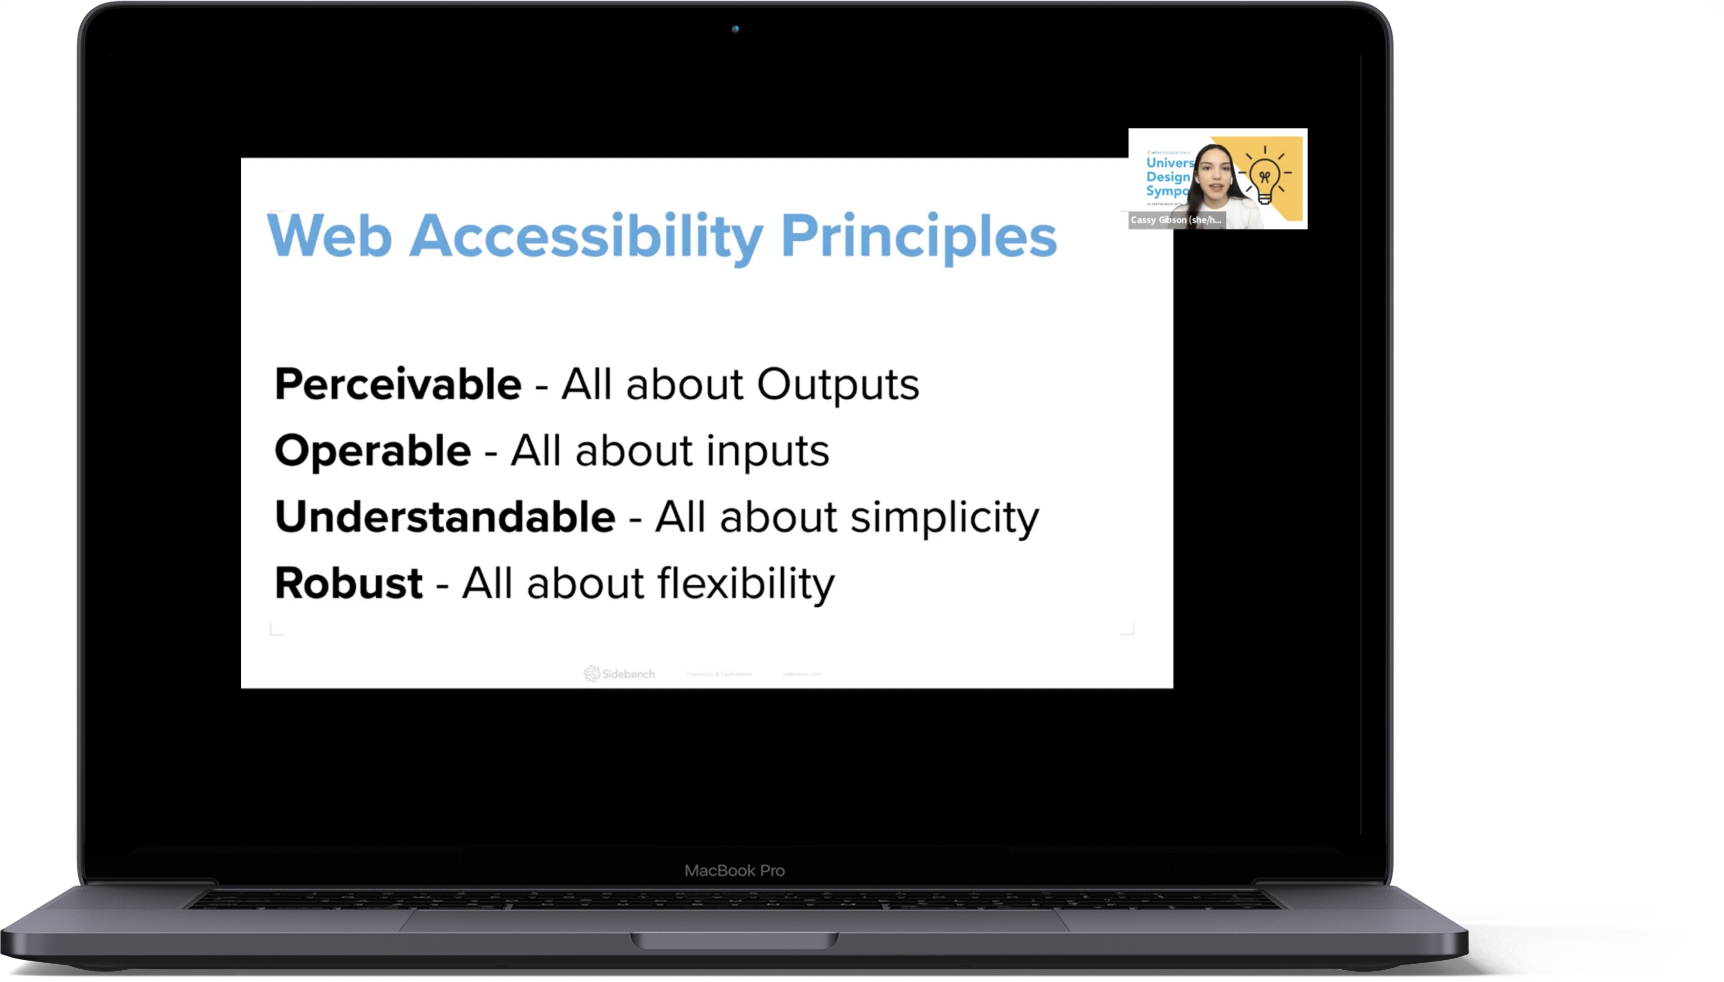 Macbook Pro showing a slide from the workshop on Web Accessibility Principles